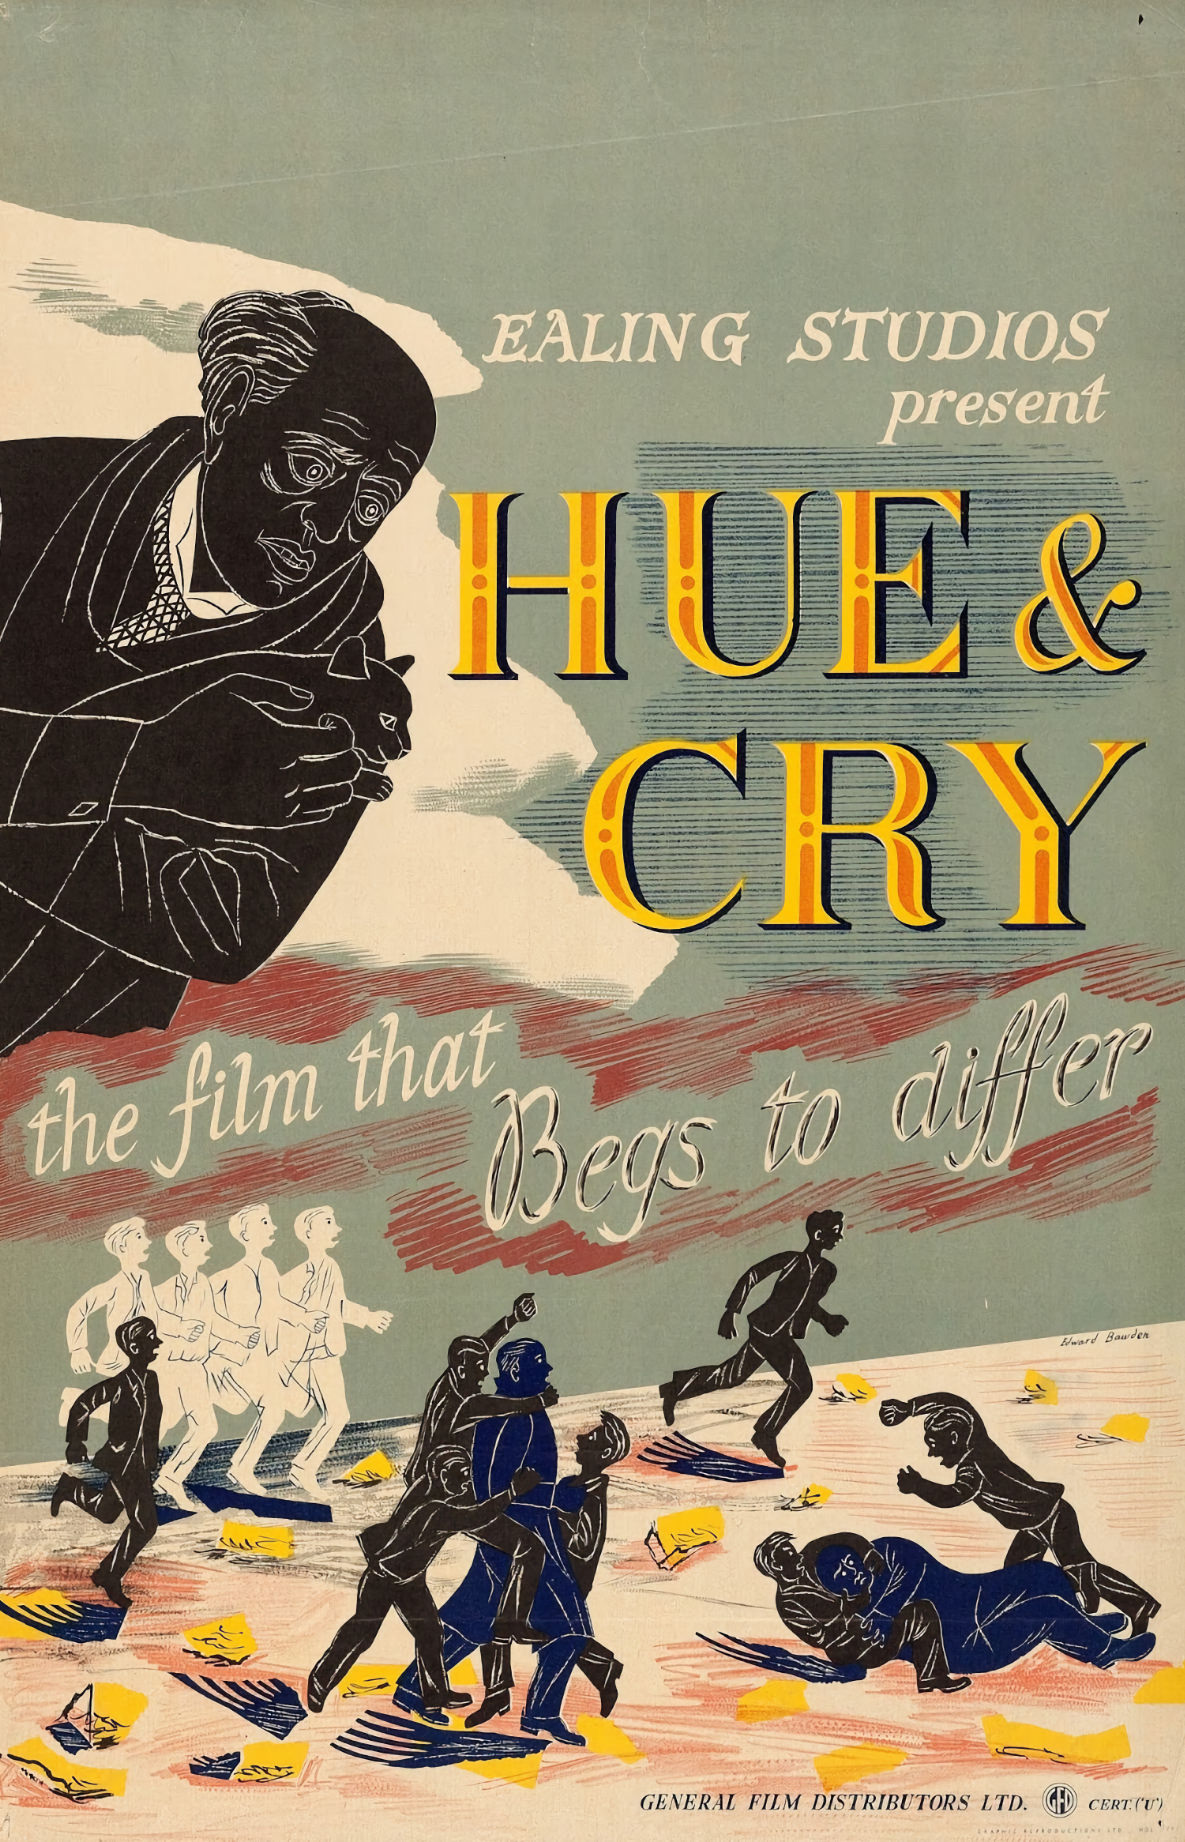 Hue and Cry is a 1947 British film directed by Charles Crichton and starring Alastair Sim, Harry Fowler and Joan Dowling.